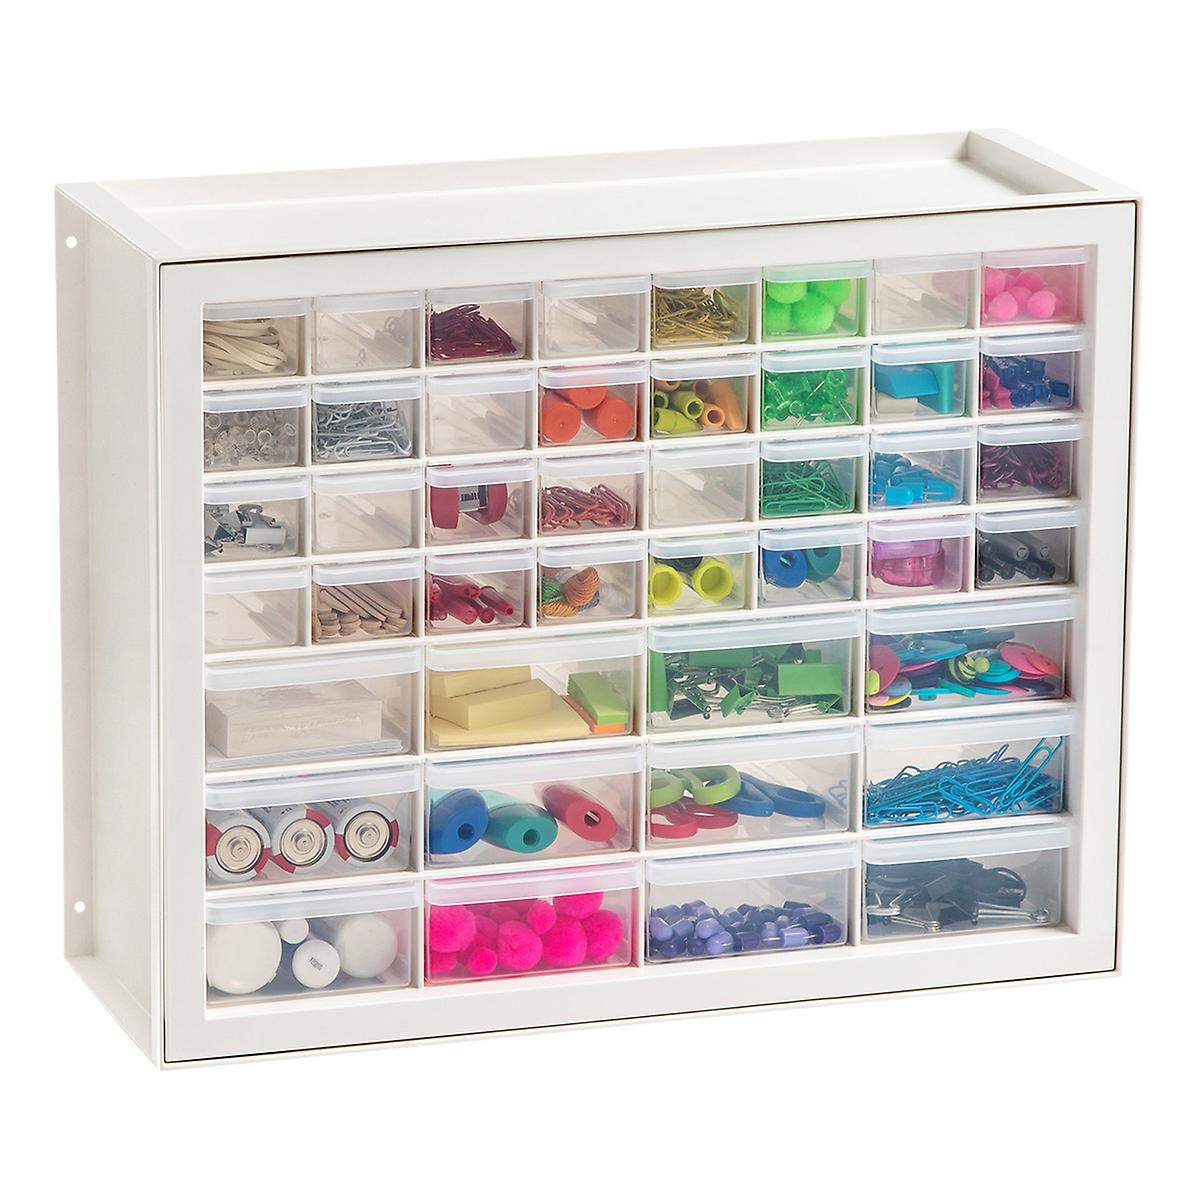 Link to the pen storage organizer I use from The Container Store